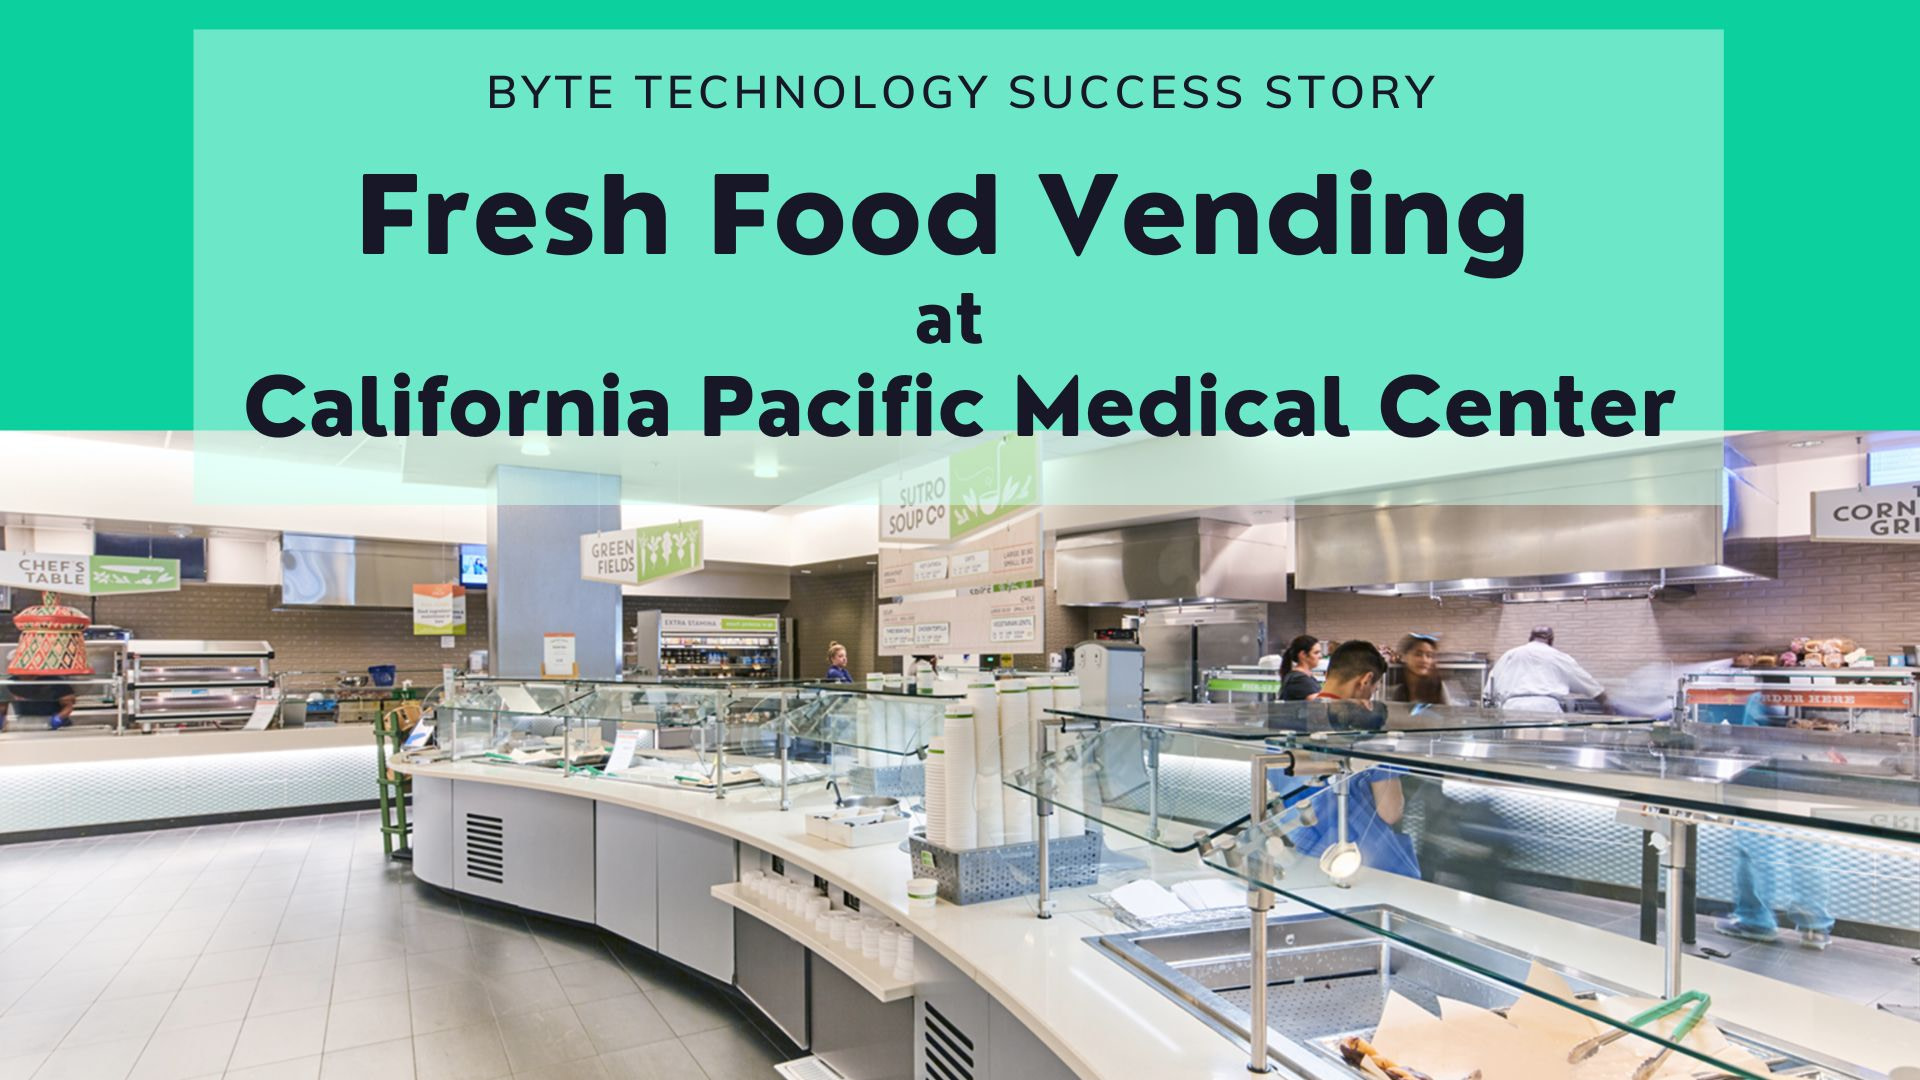 Byte Success Stories: Fresh Food Vending at California Pacific Medical Center